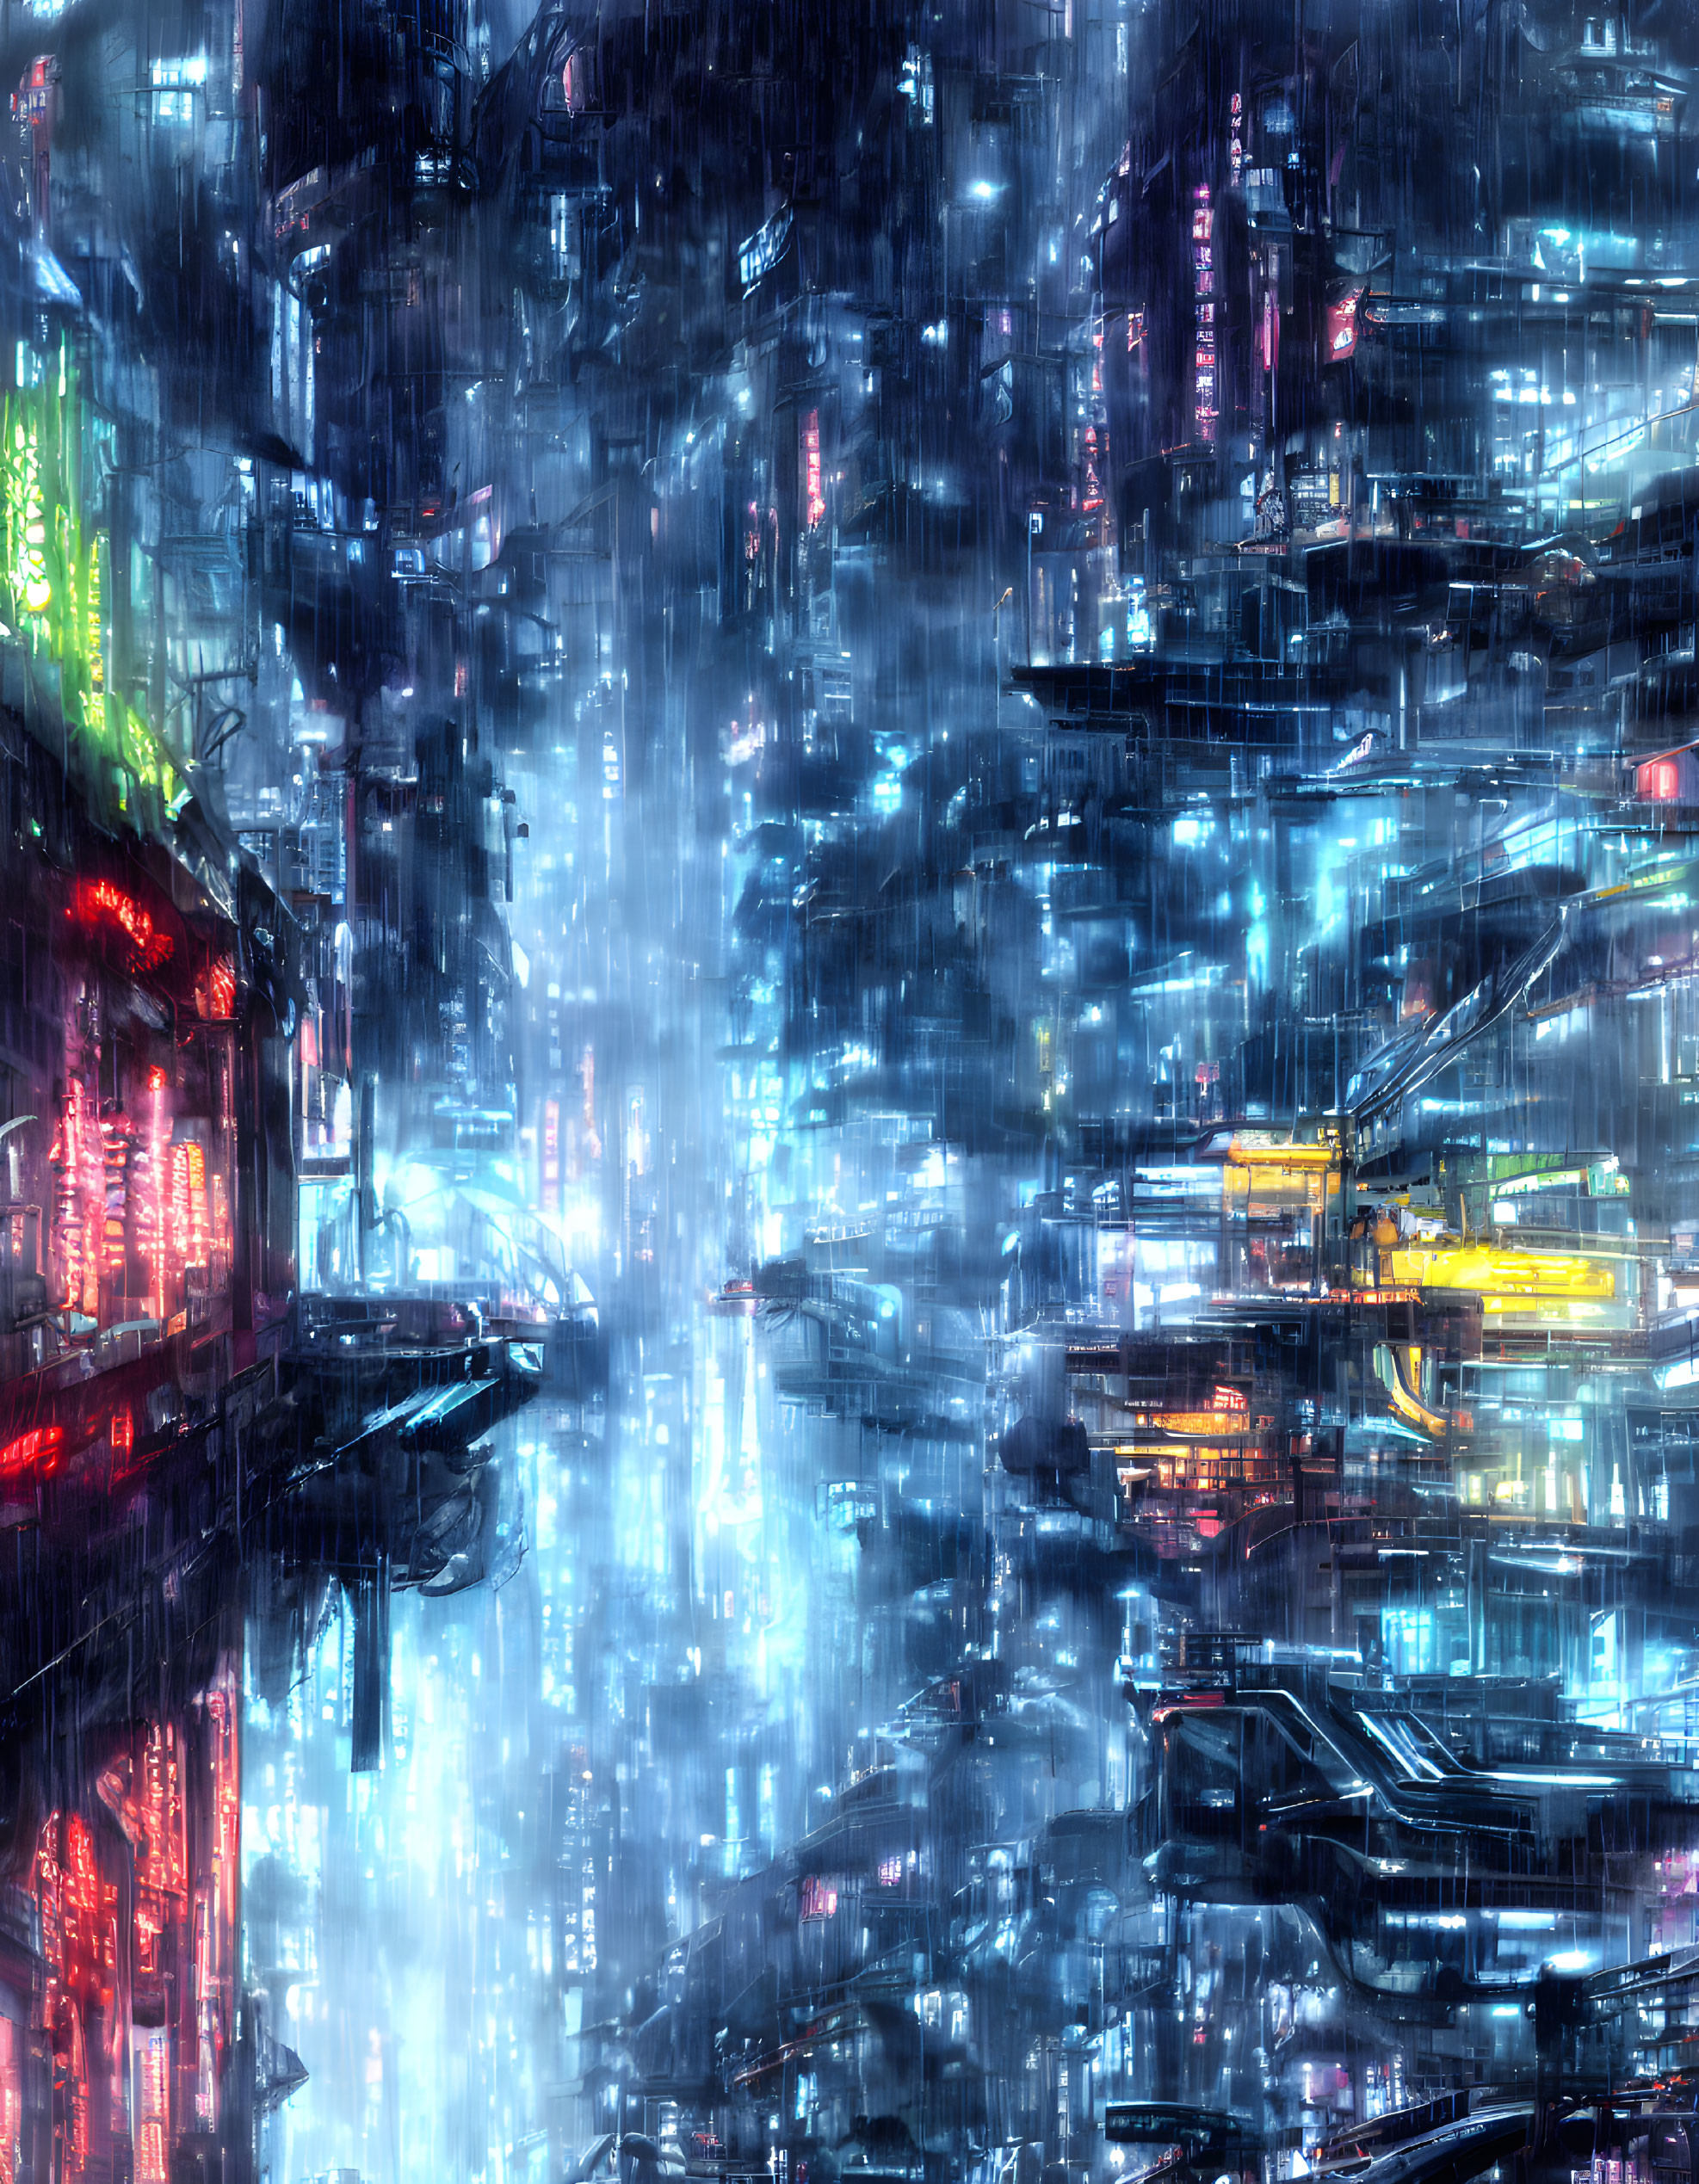 Nighttime futuristic cityscape with neon signs, illuminated buildings, and flying vehicles in a rainy urban setting